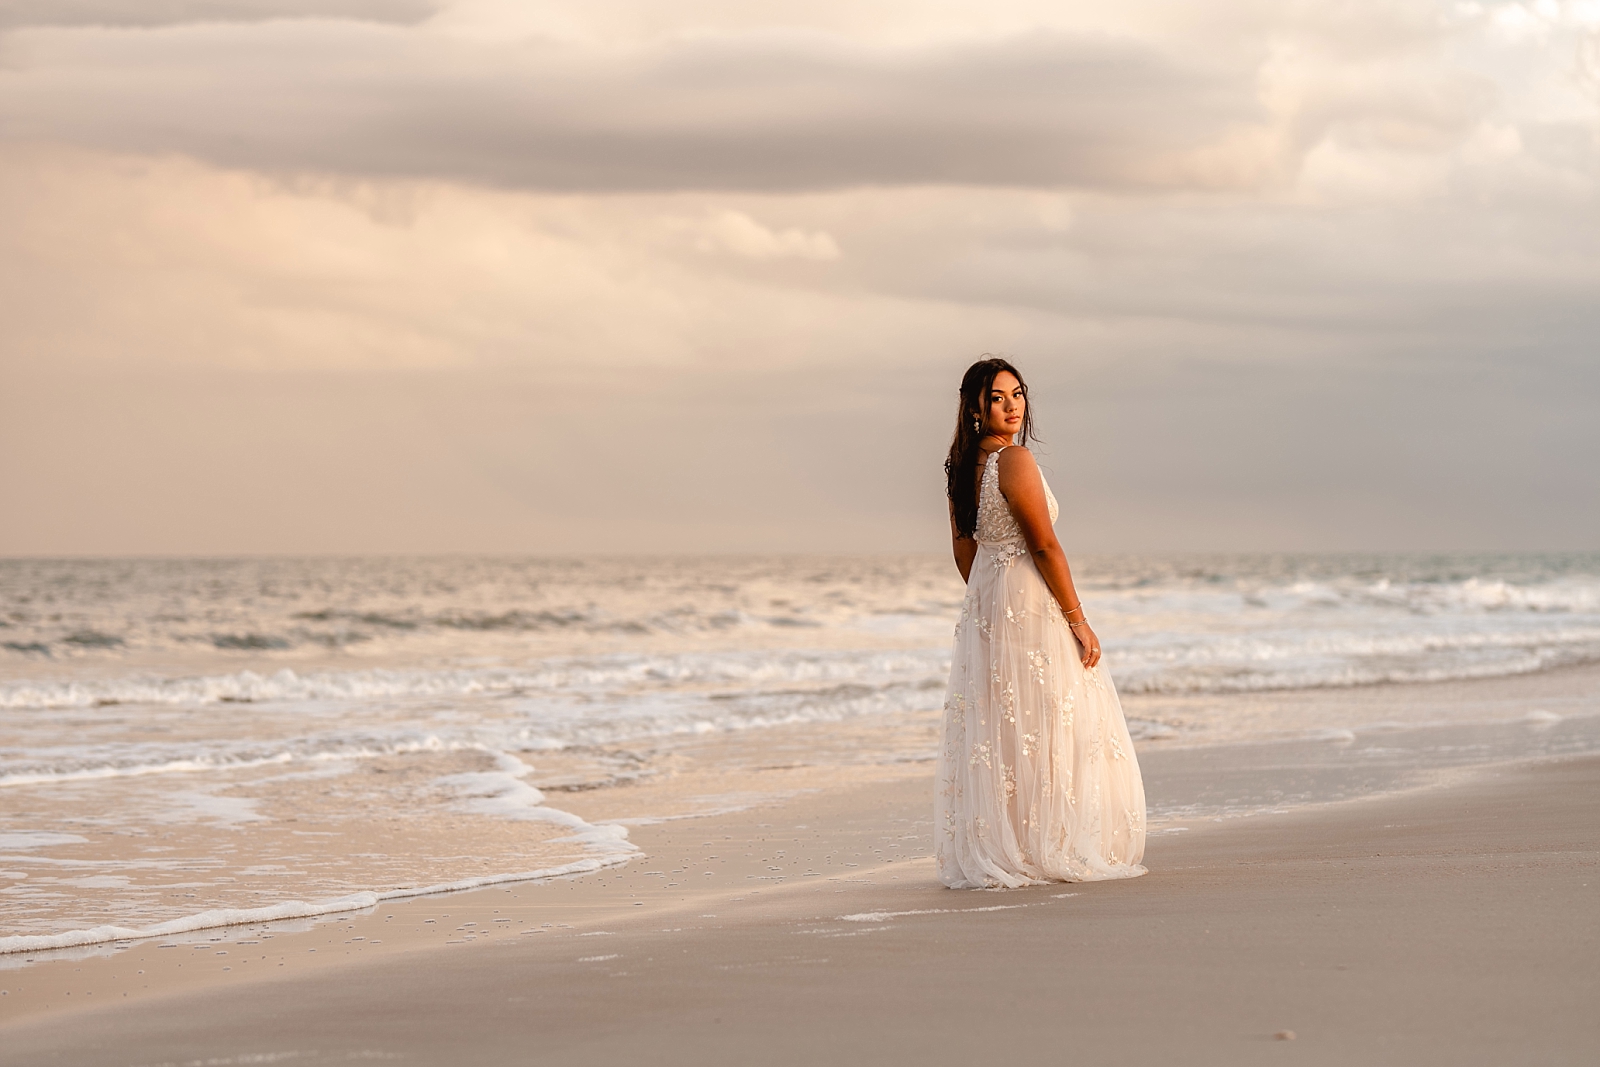 Sunset pictures on the beach for senior girl in a long, flowy, white dress with moody storm clouds in the background. Senior Photographer, Painted Oak Photography.